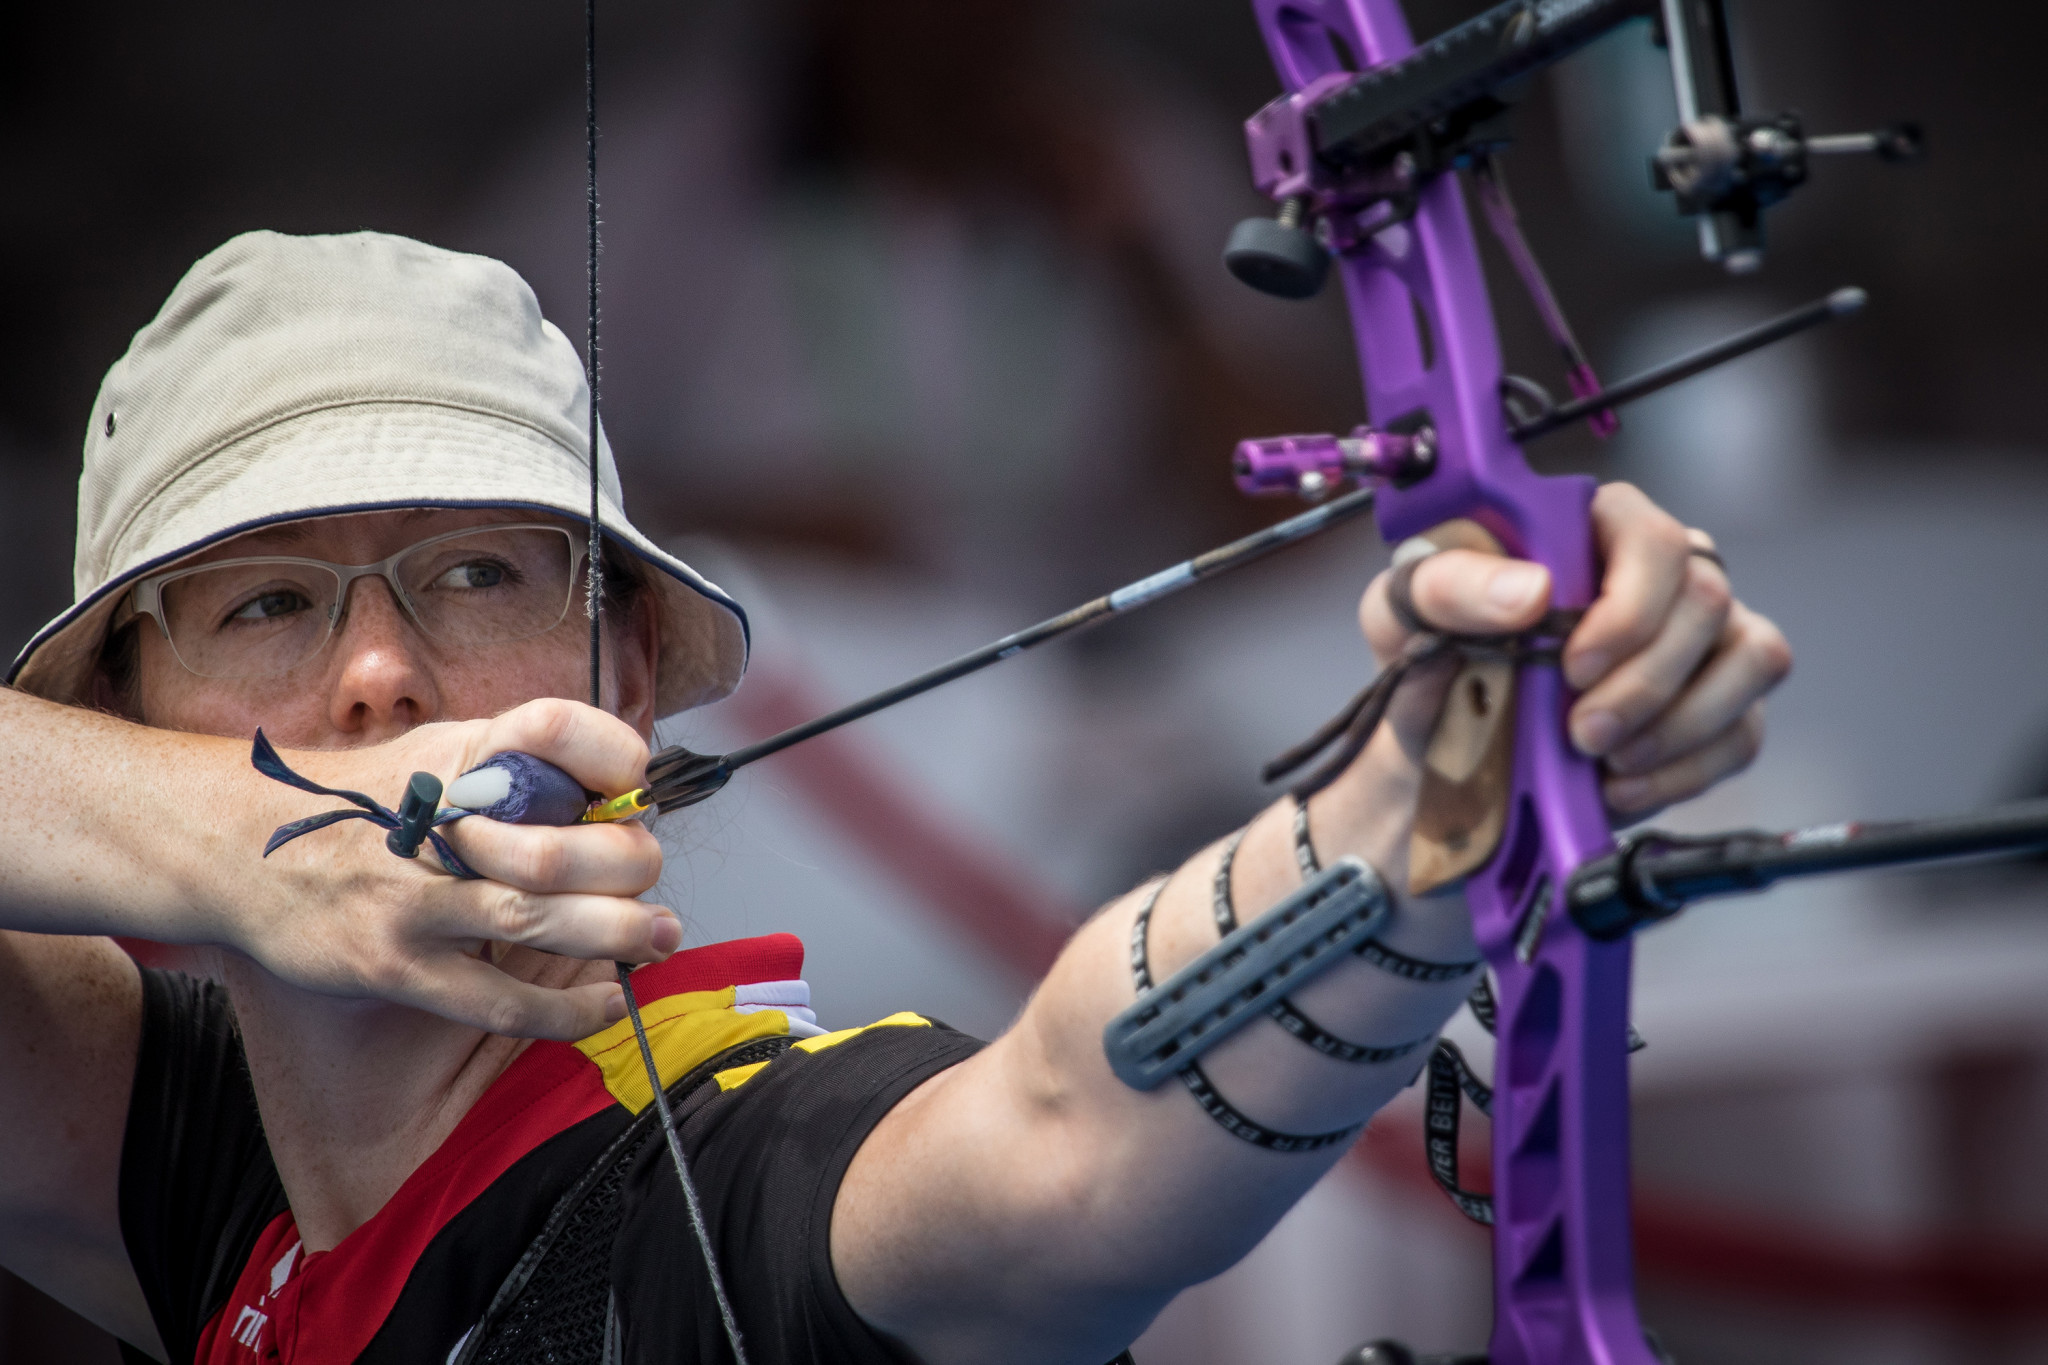 Unruh reaches home final at Archery World Cup in Berlin